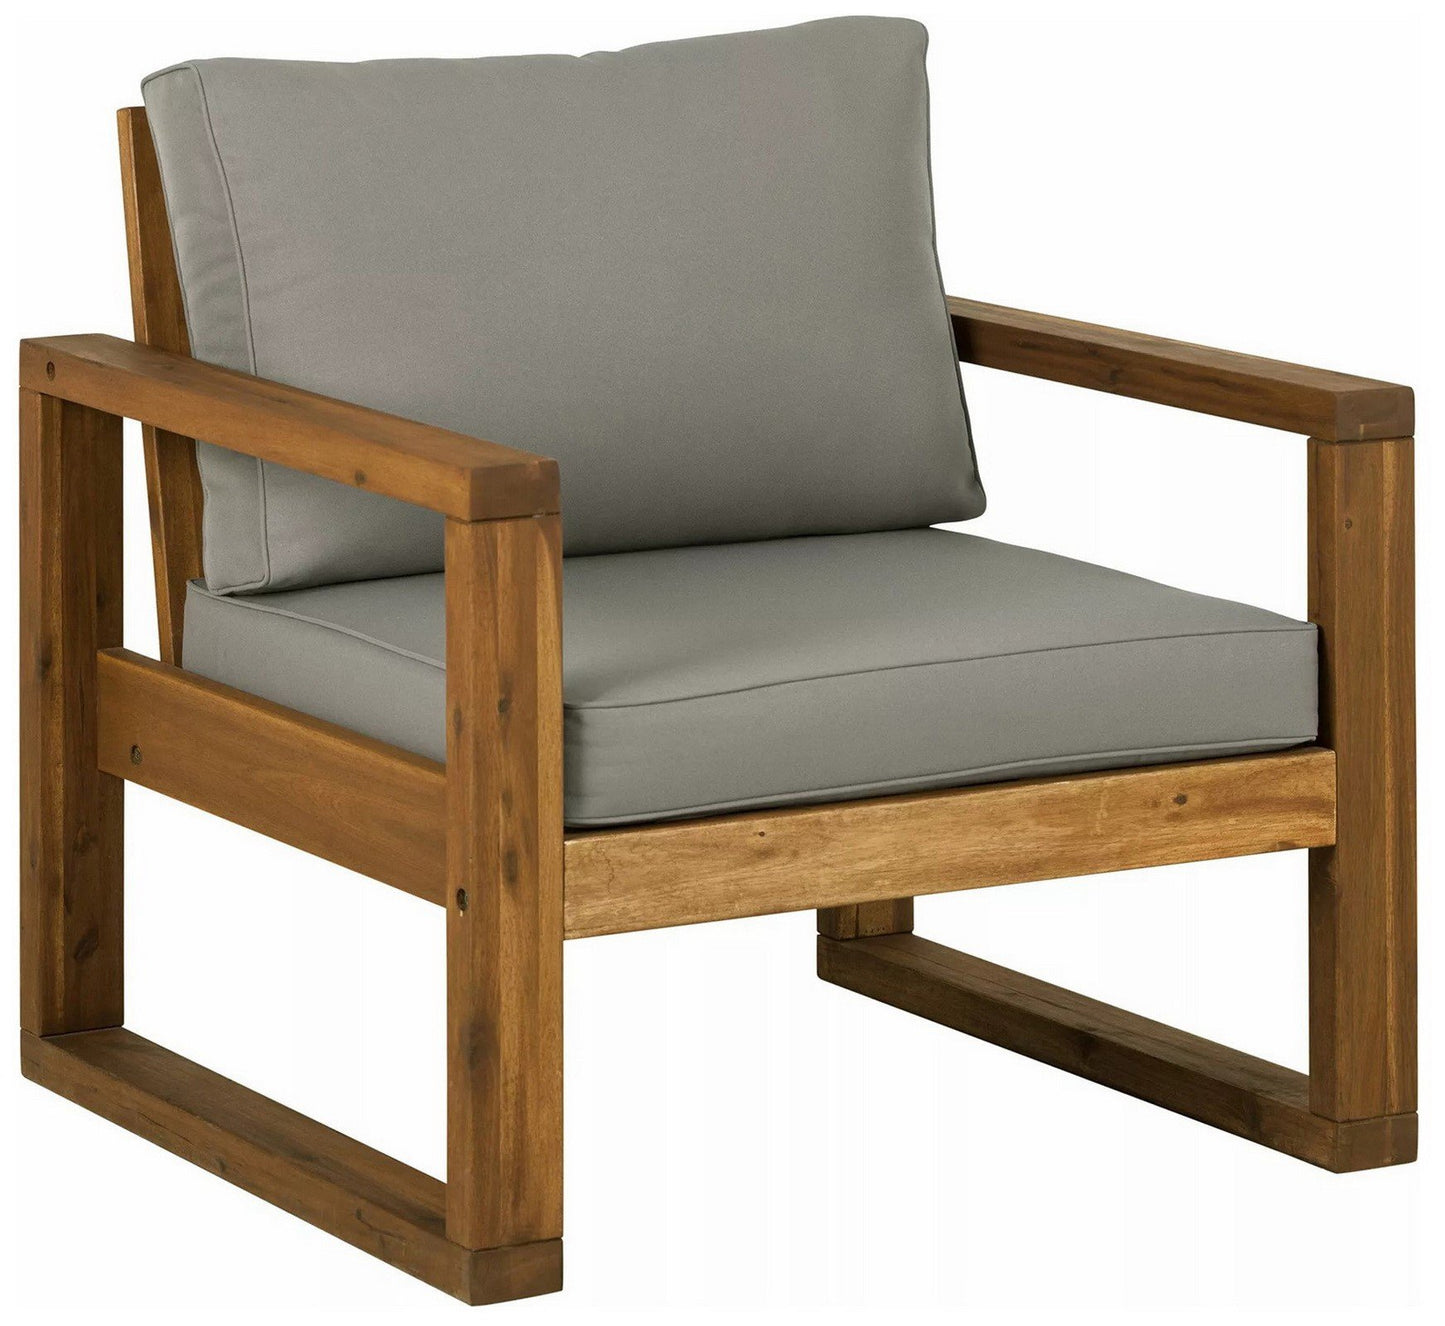 Outdoor Weather Resistant Arbor Acacia Wood Chair Ottoman With Cushions